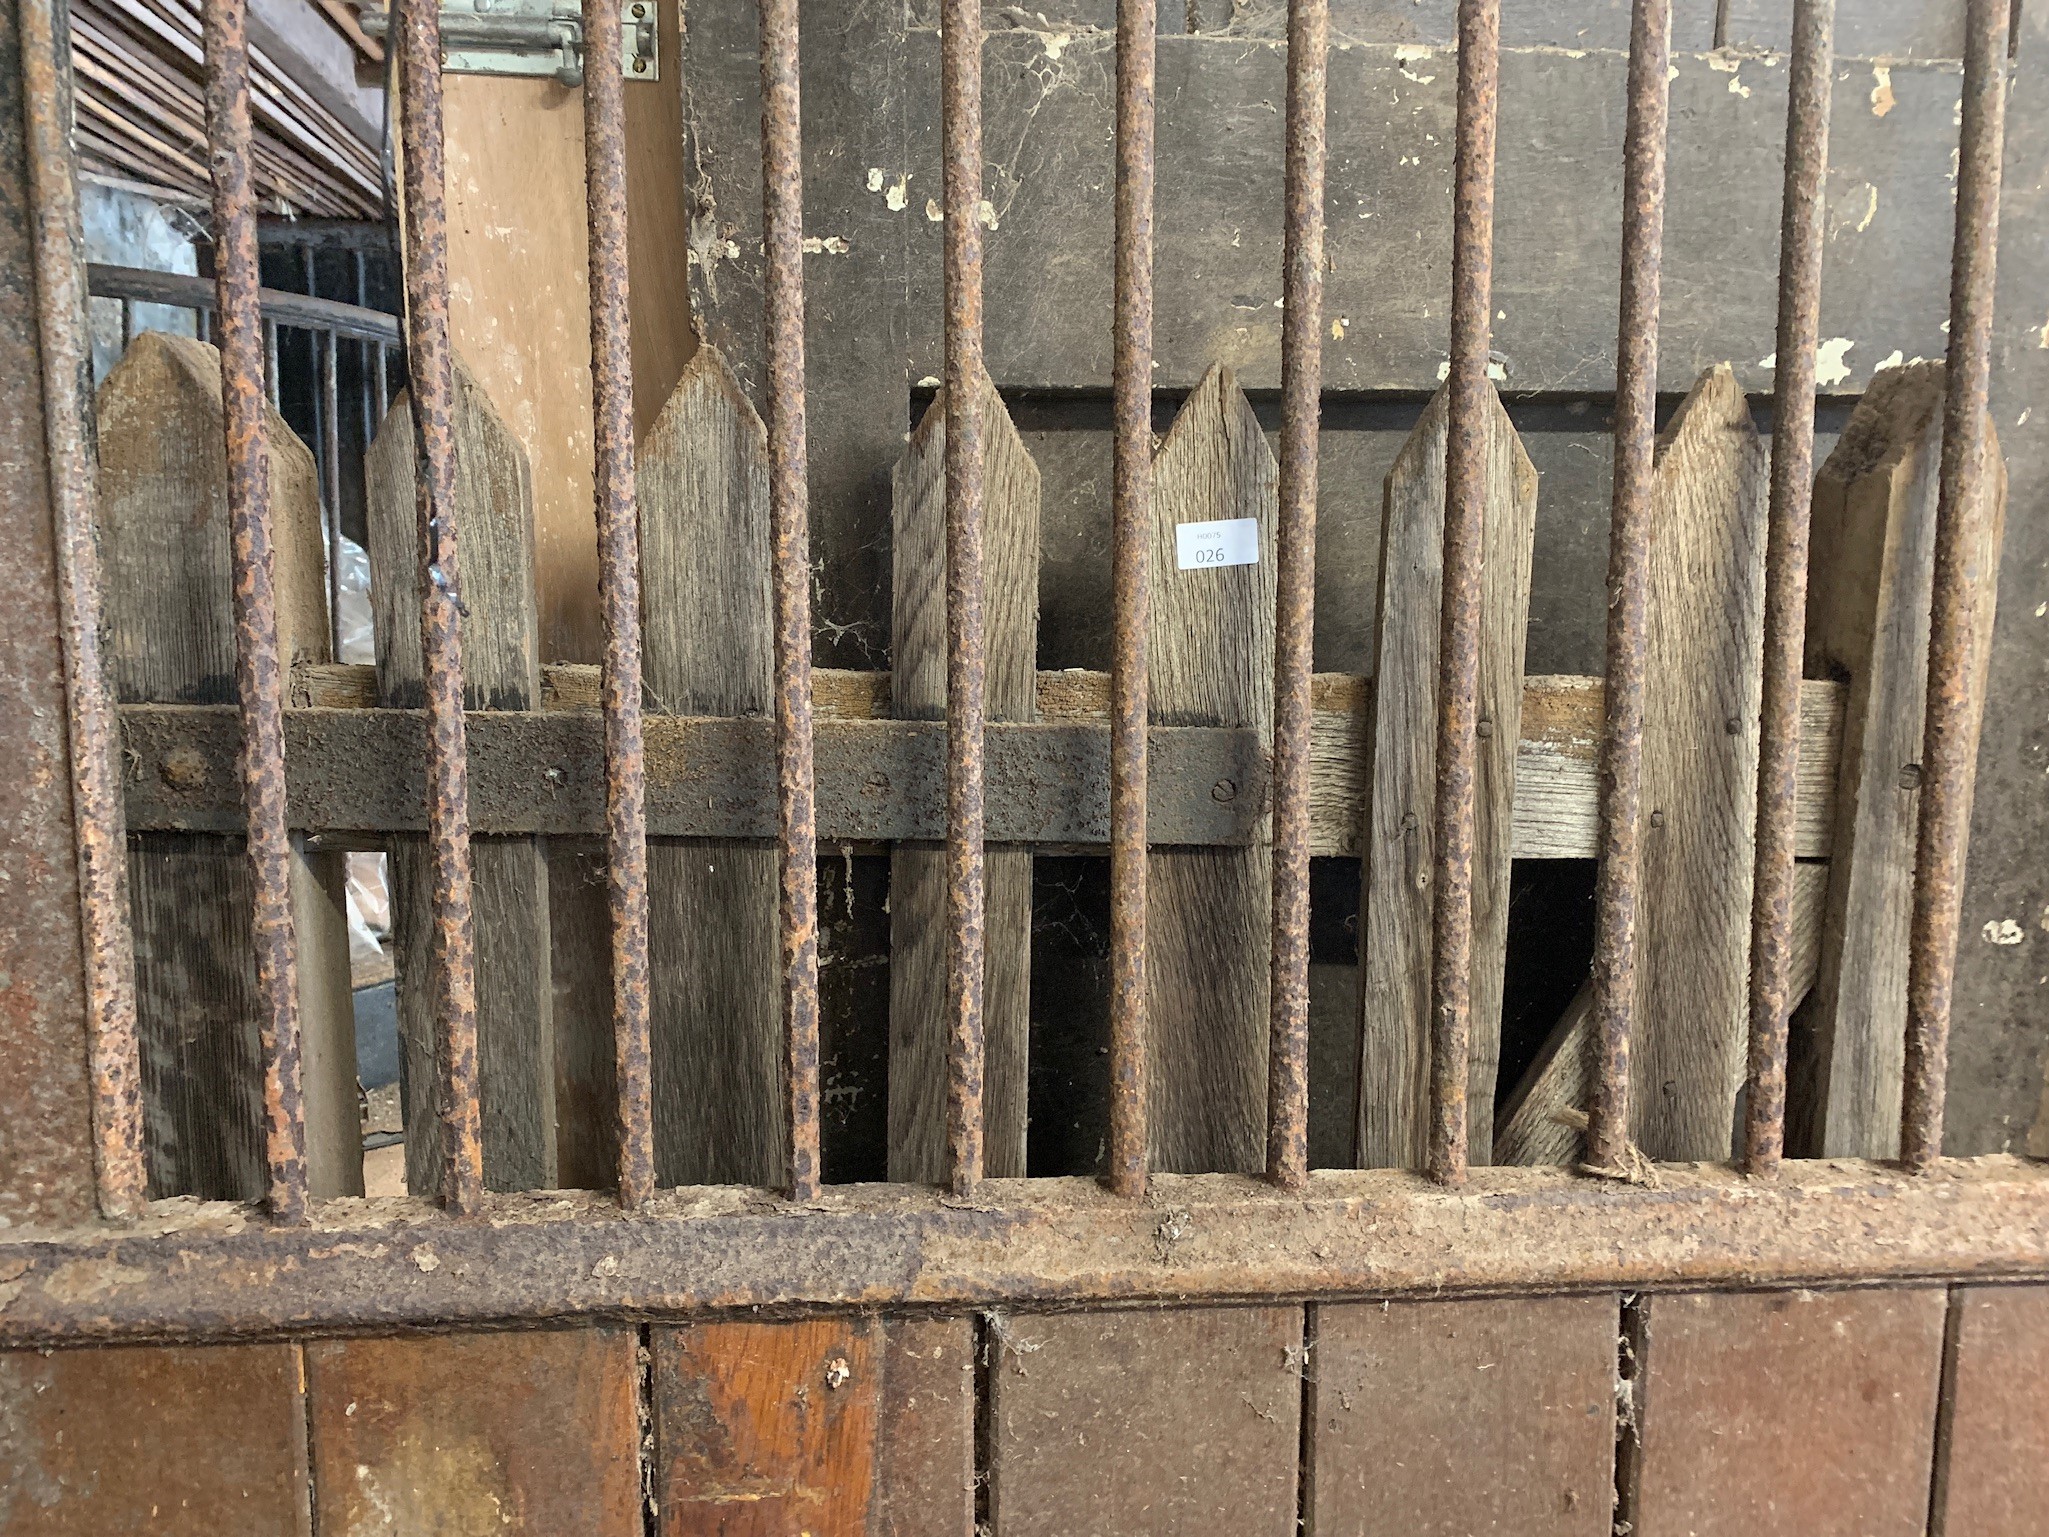 LOT WITHDRAWN - An oak ledge and brace picket gate with iron hinges. (Dimensions: 165 x 90cm)(165